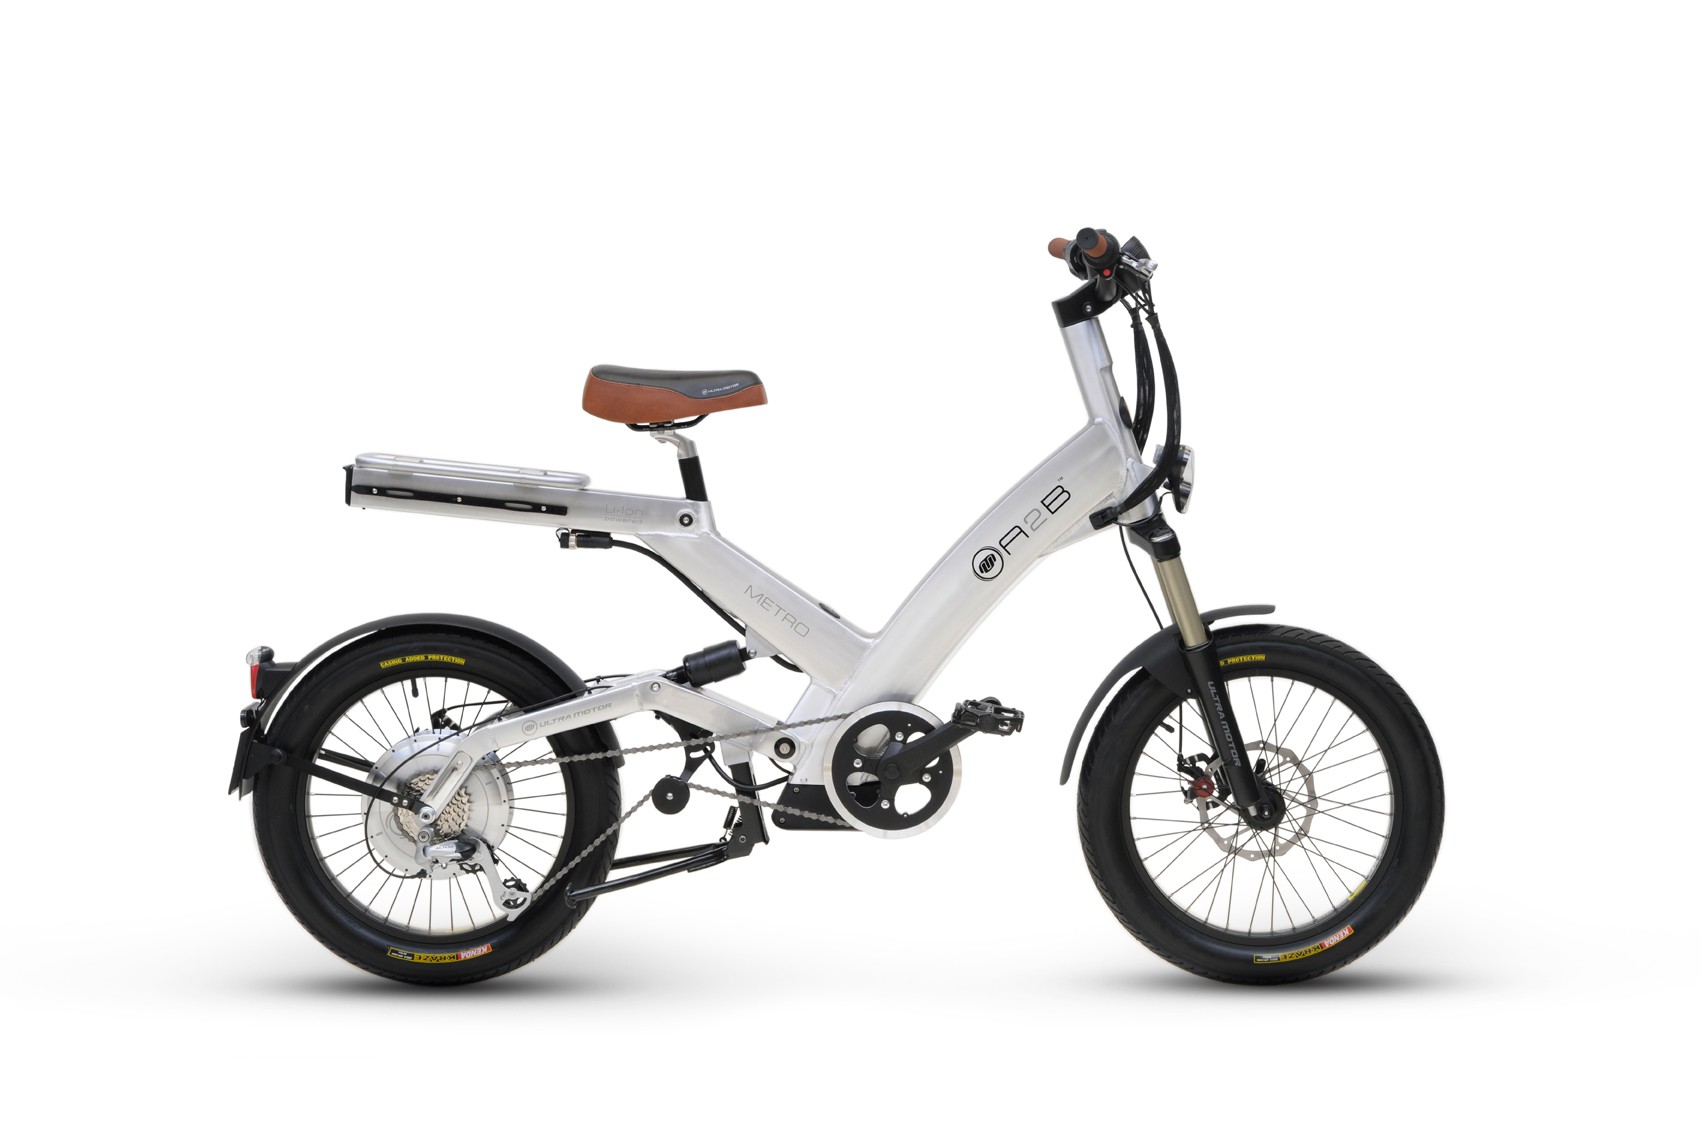 Eco Electric Bike Factory Sale, 50% OFF | pwdnutrition.com